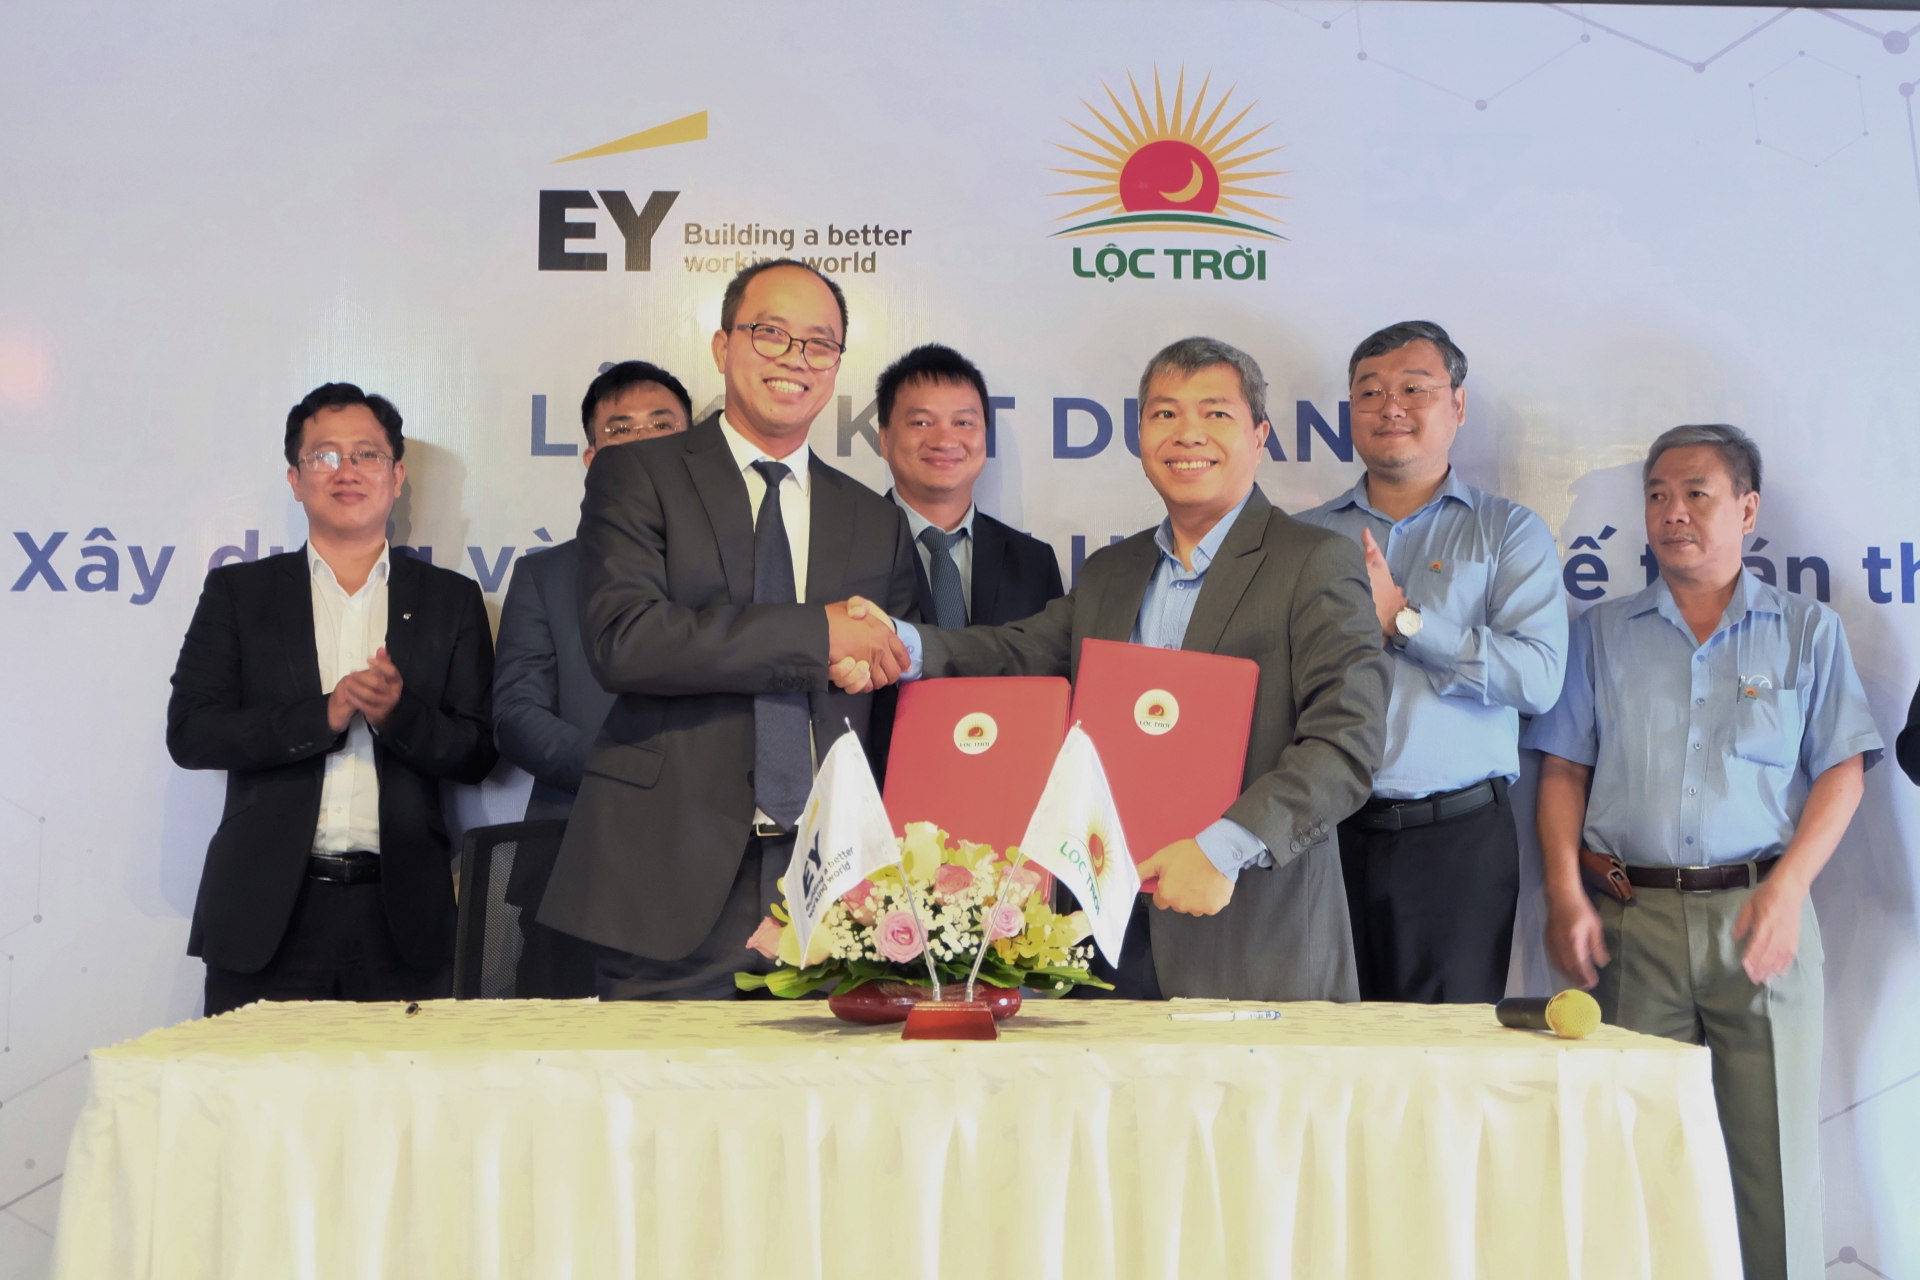 ey vietnam collaborates with loc troi group for ifrs adoption